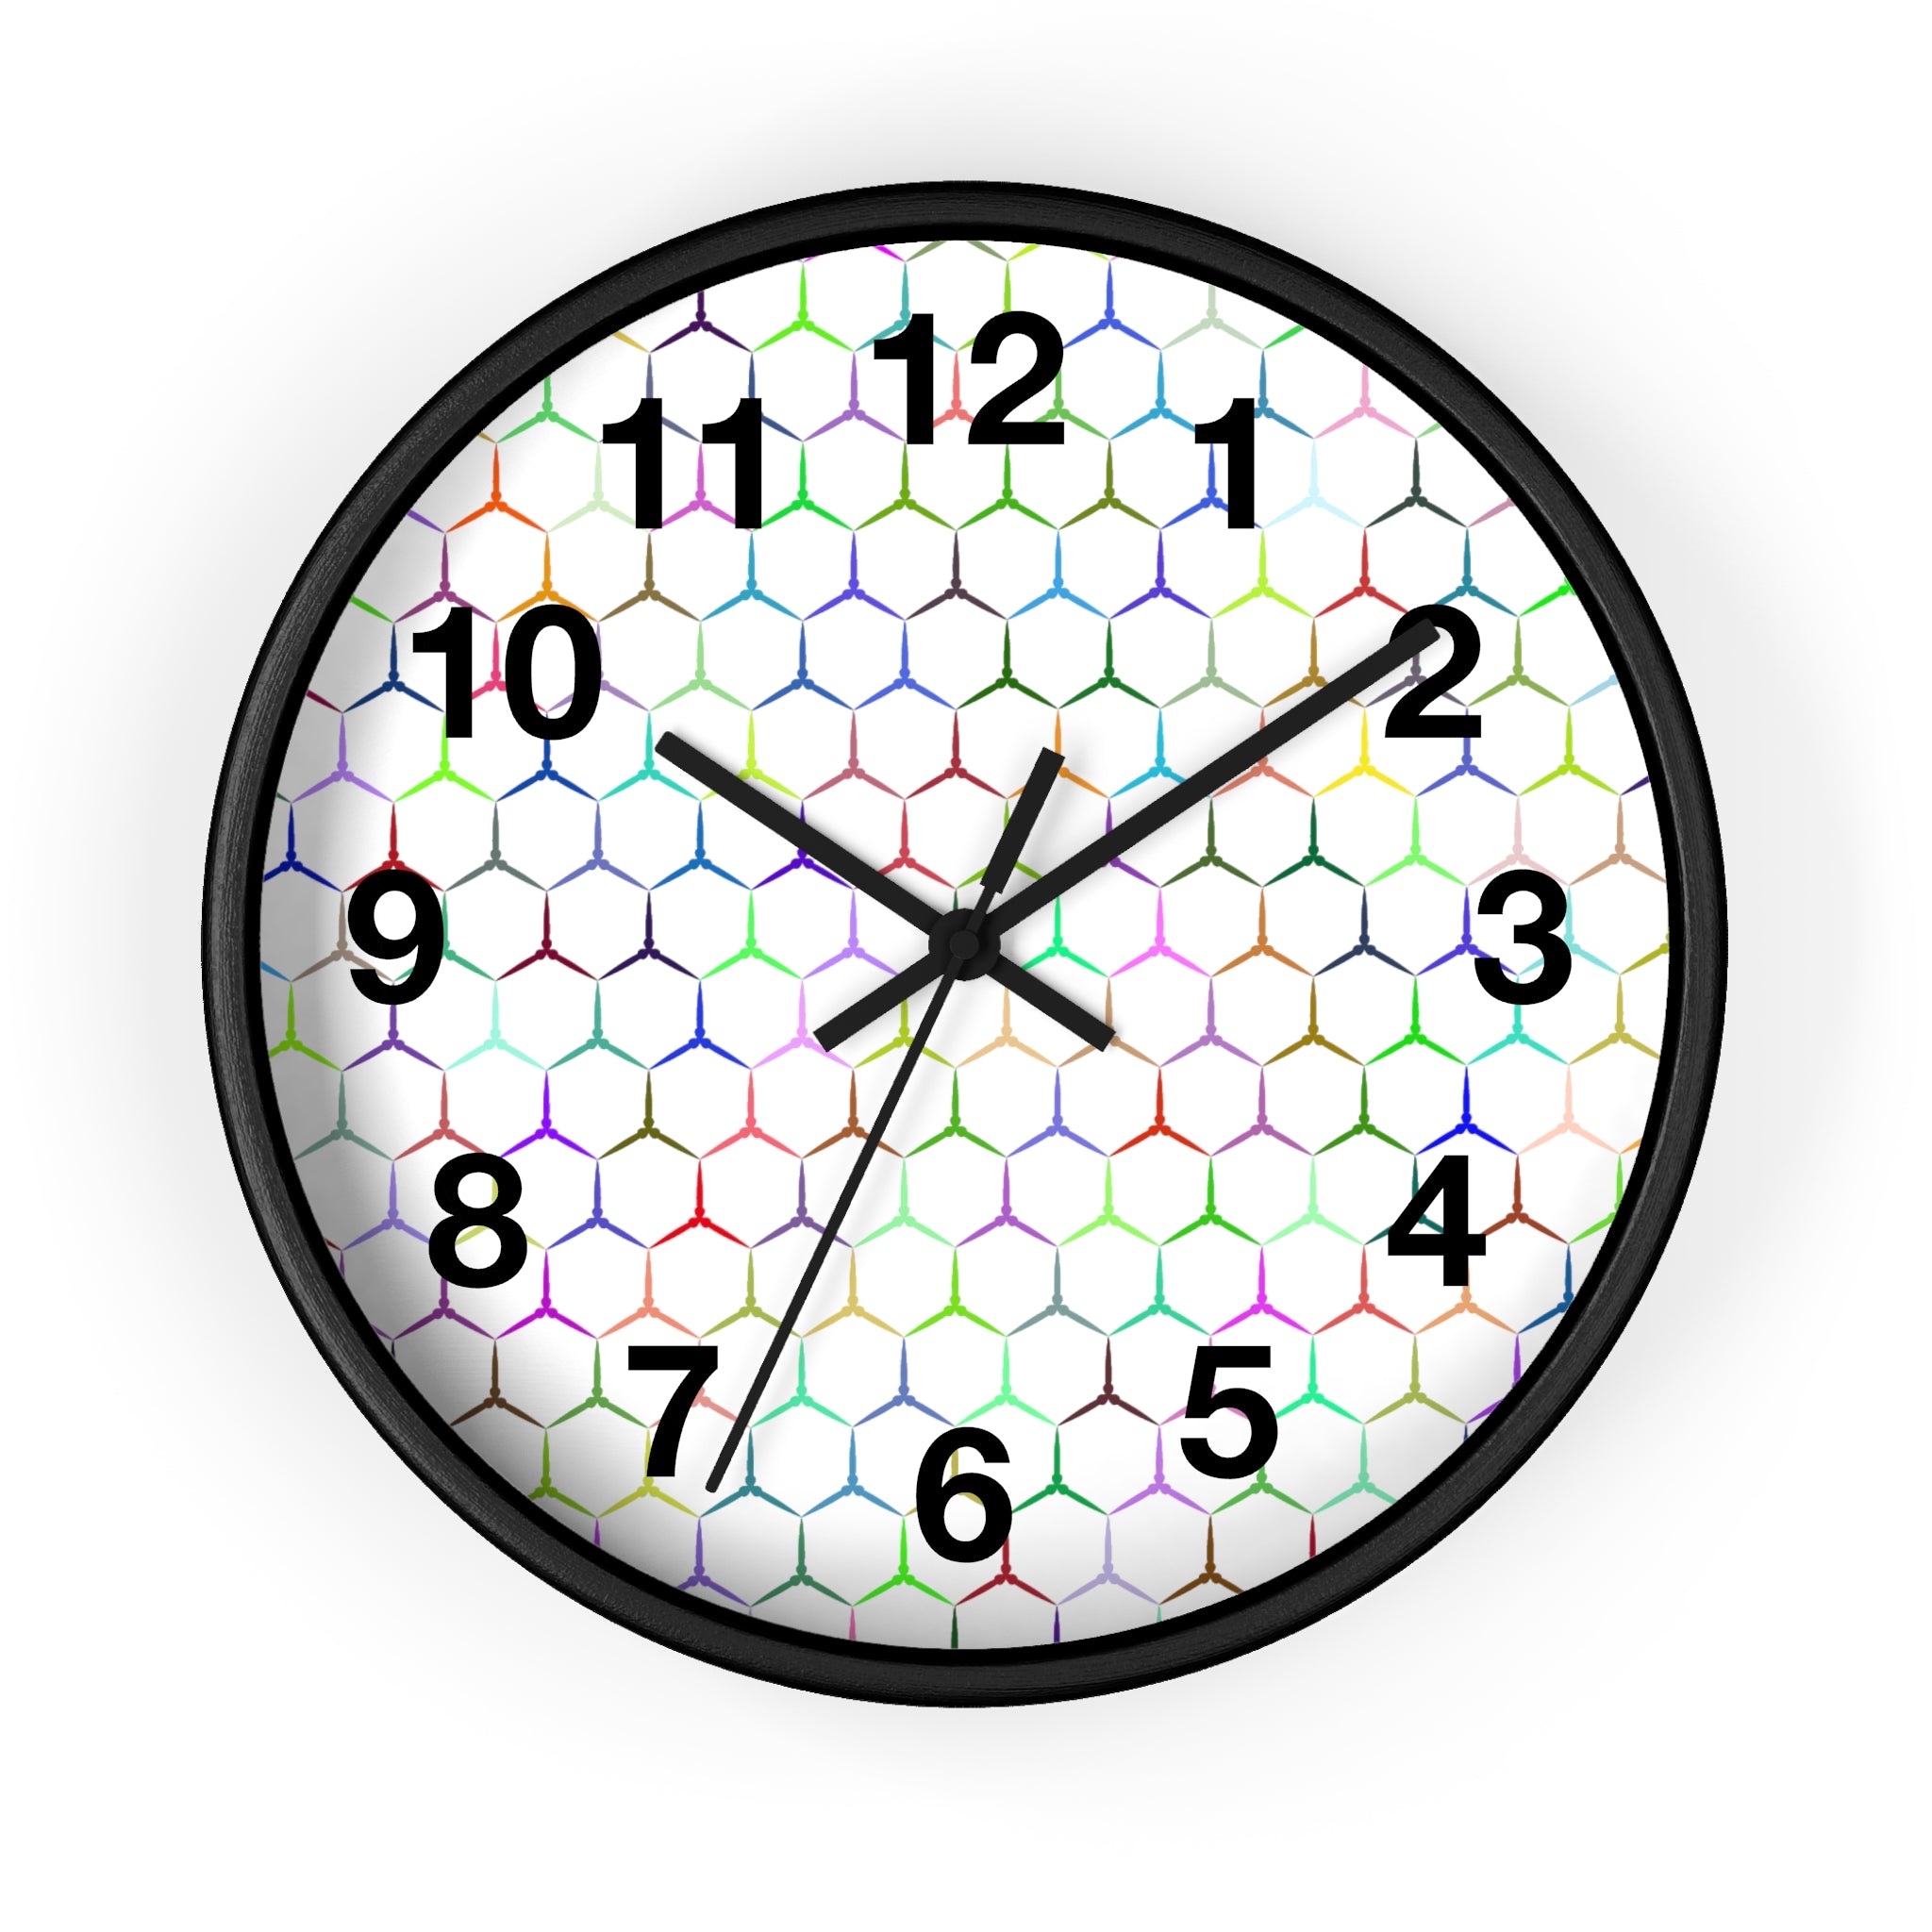 10 inch round wall clock with colorful geometric shape outlines reminiscent of snake skin